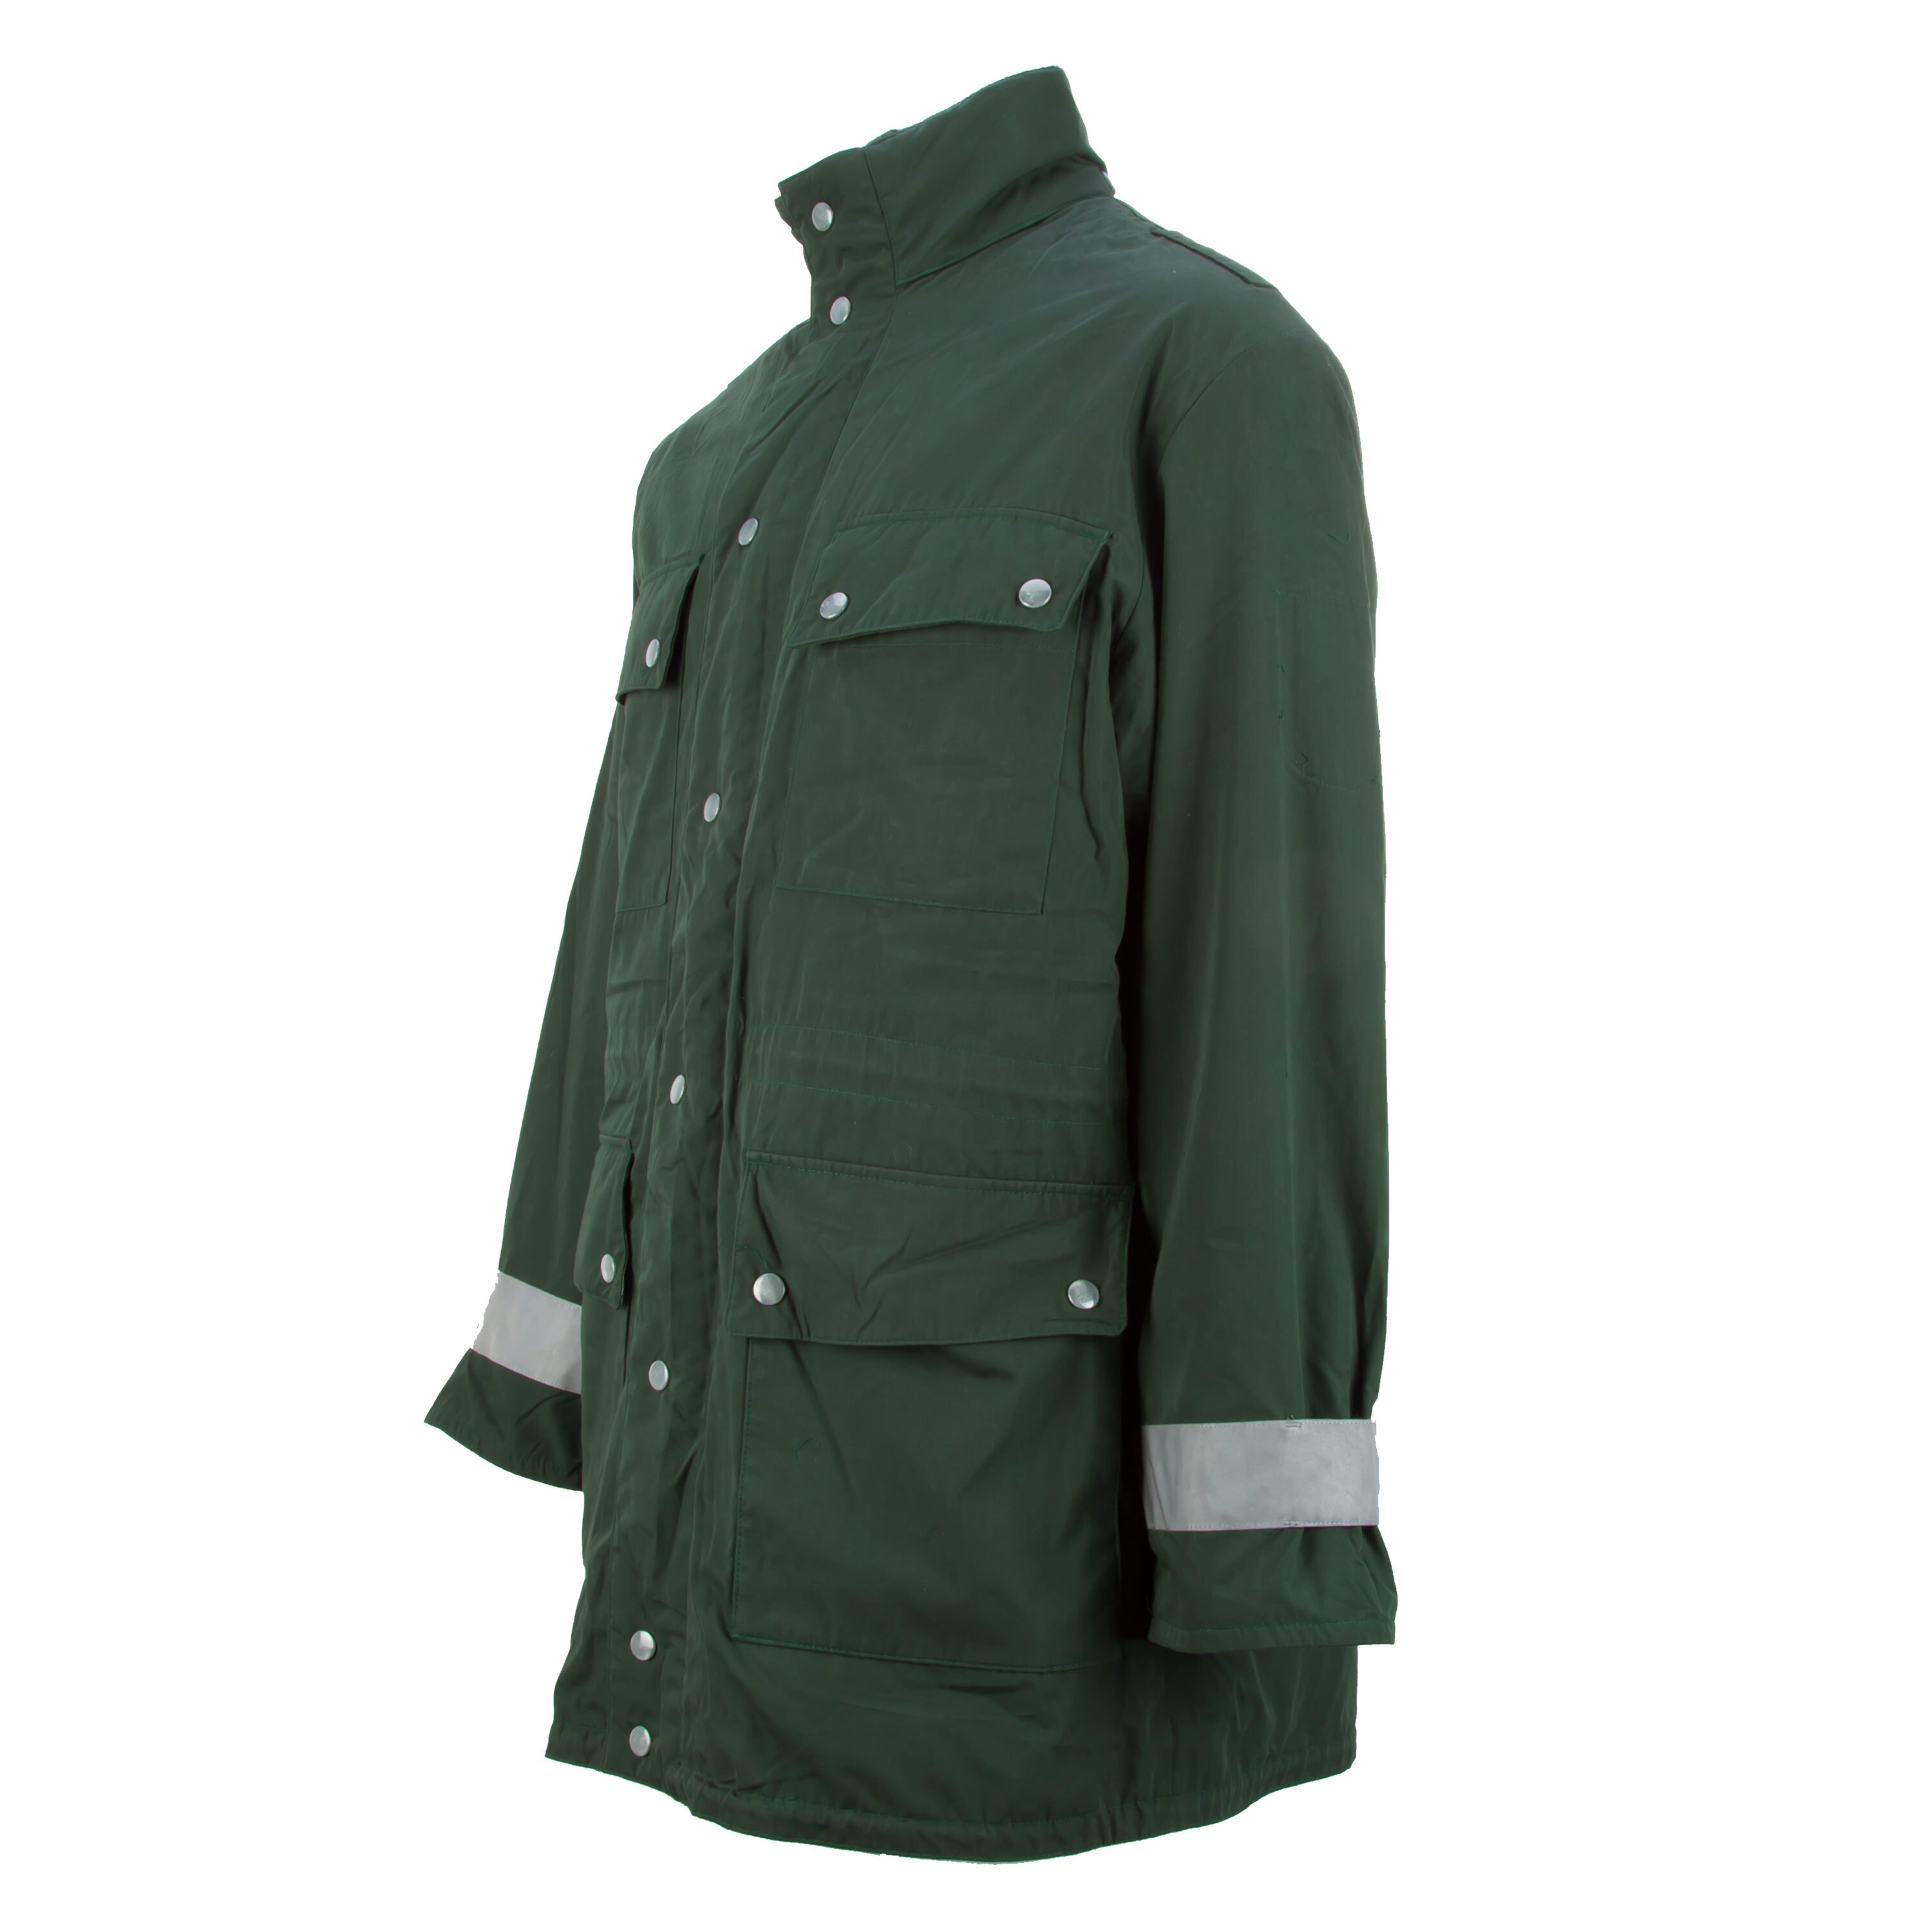 Purchase the Original BGS Parka with Gore-Tex Liner Used by ASMC